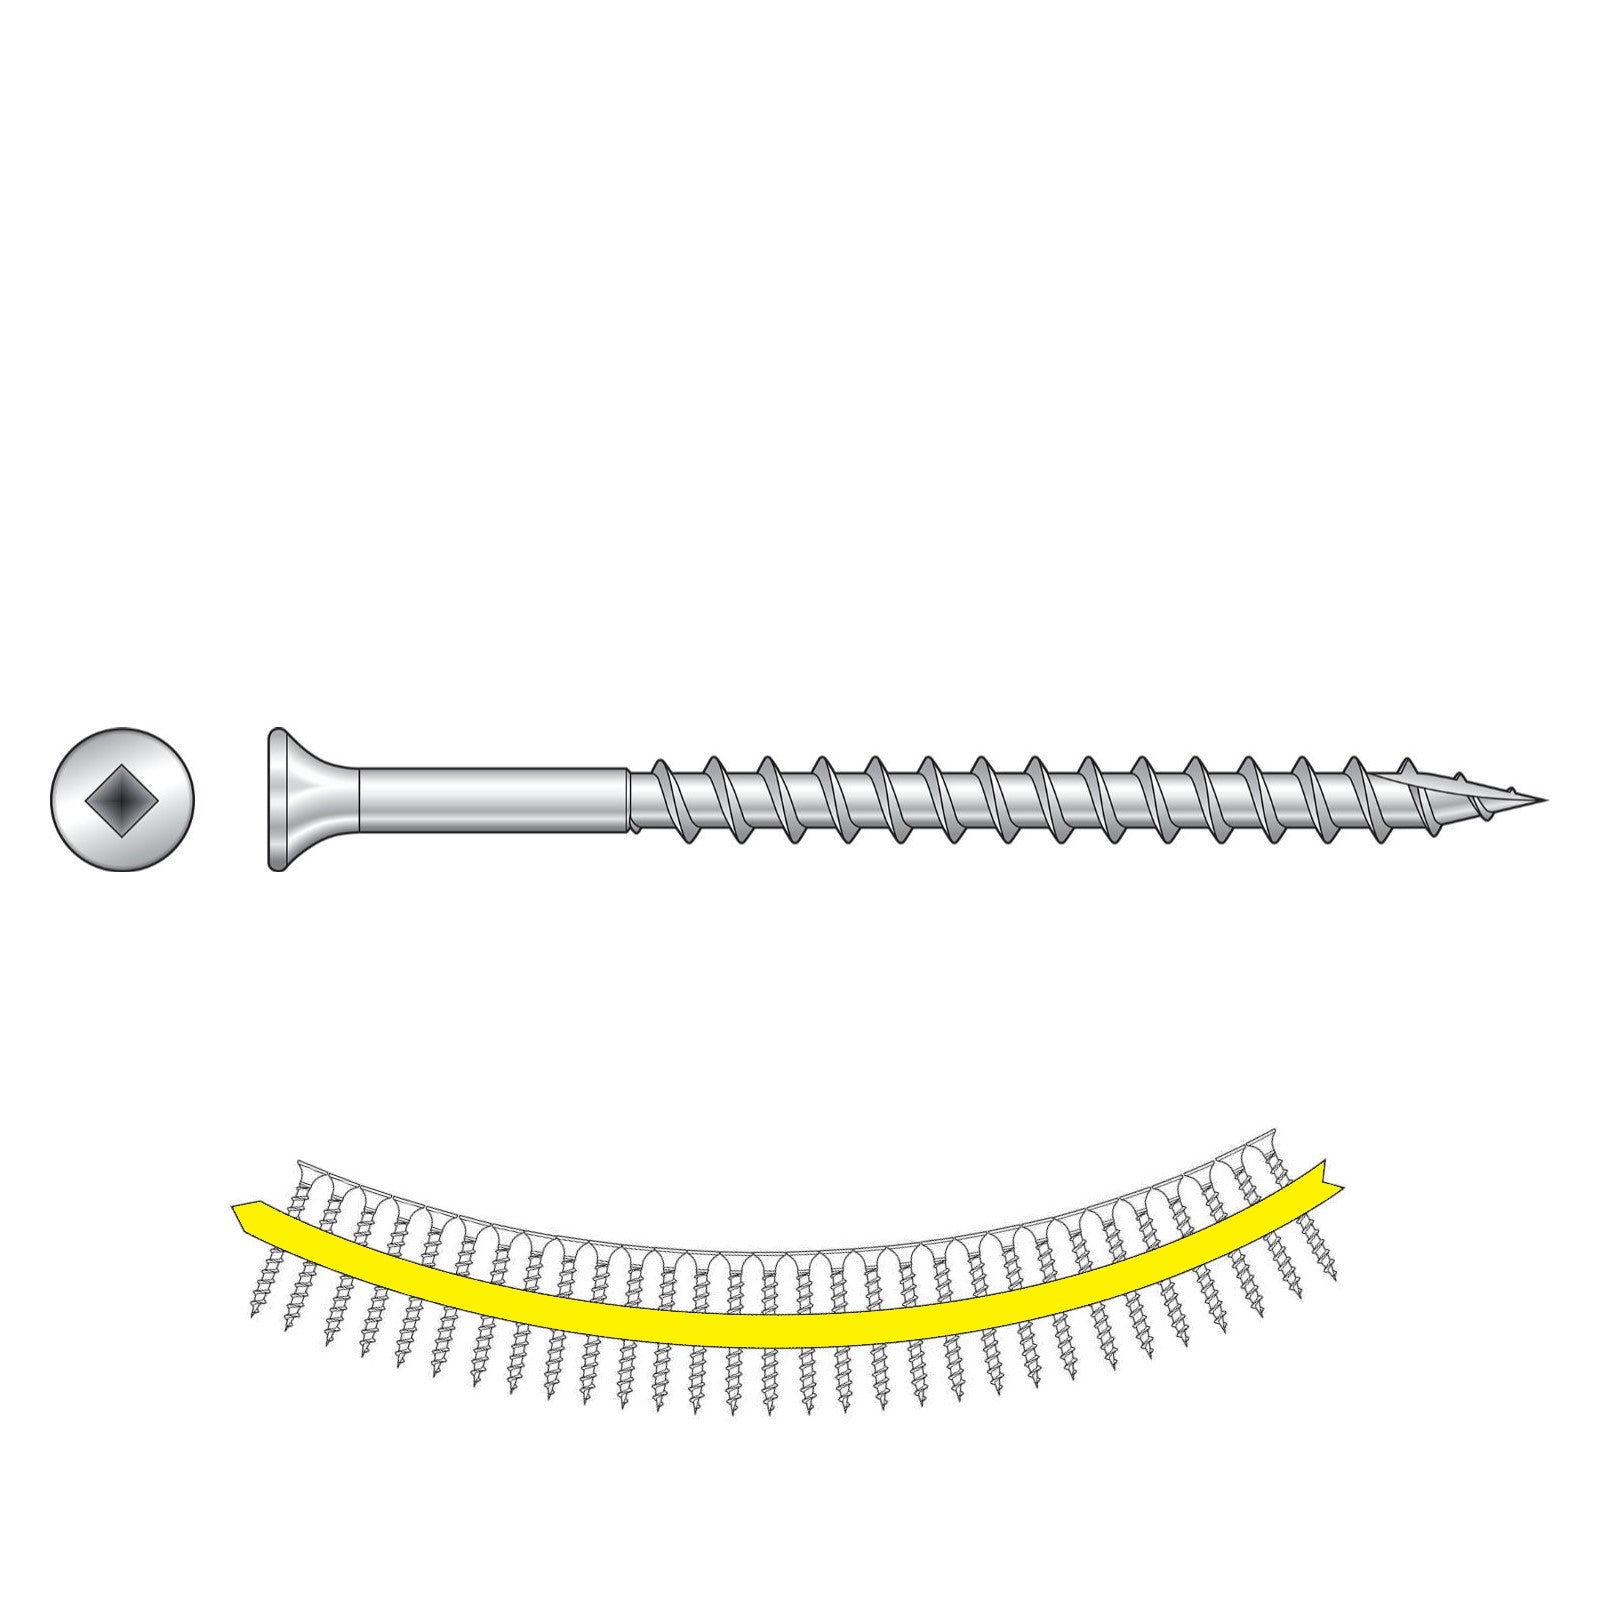 #10 x 212 inch Quik Drive SS3DSC BugleHead Wood Decking Screw 305 Stainless Pkg 1500 image 1 of 2